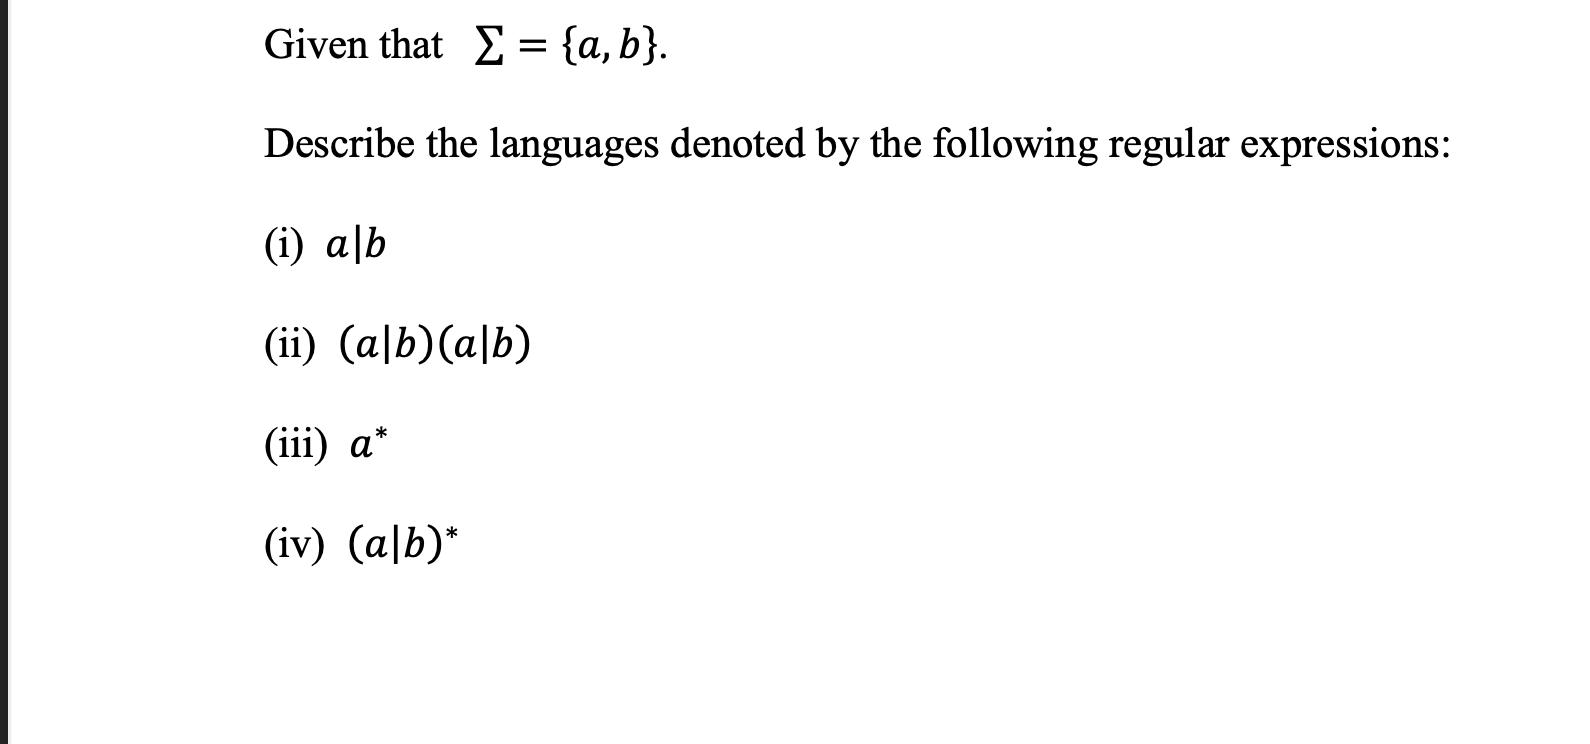 Given that = {a, b}. Describe the languages denoted by the following regular expressions: (i) alb (ii) (alb)